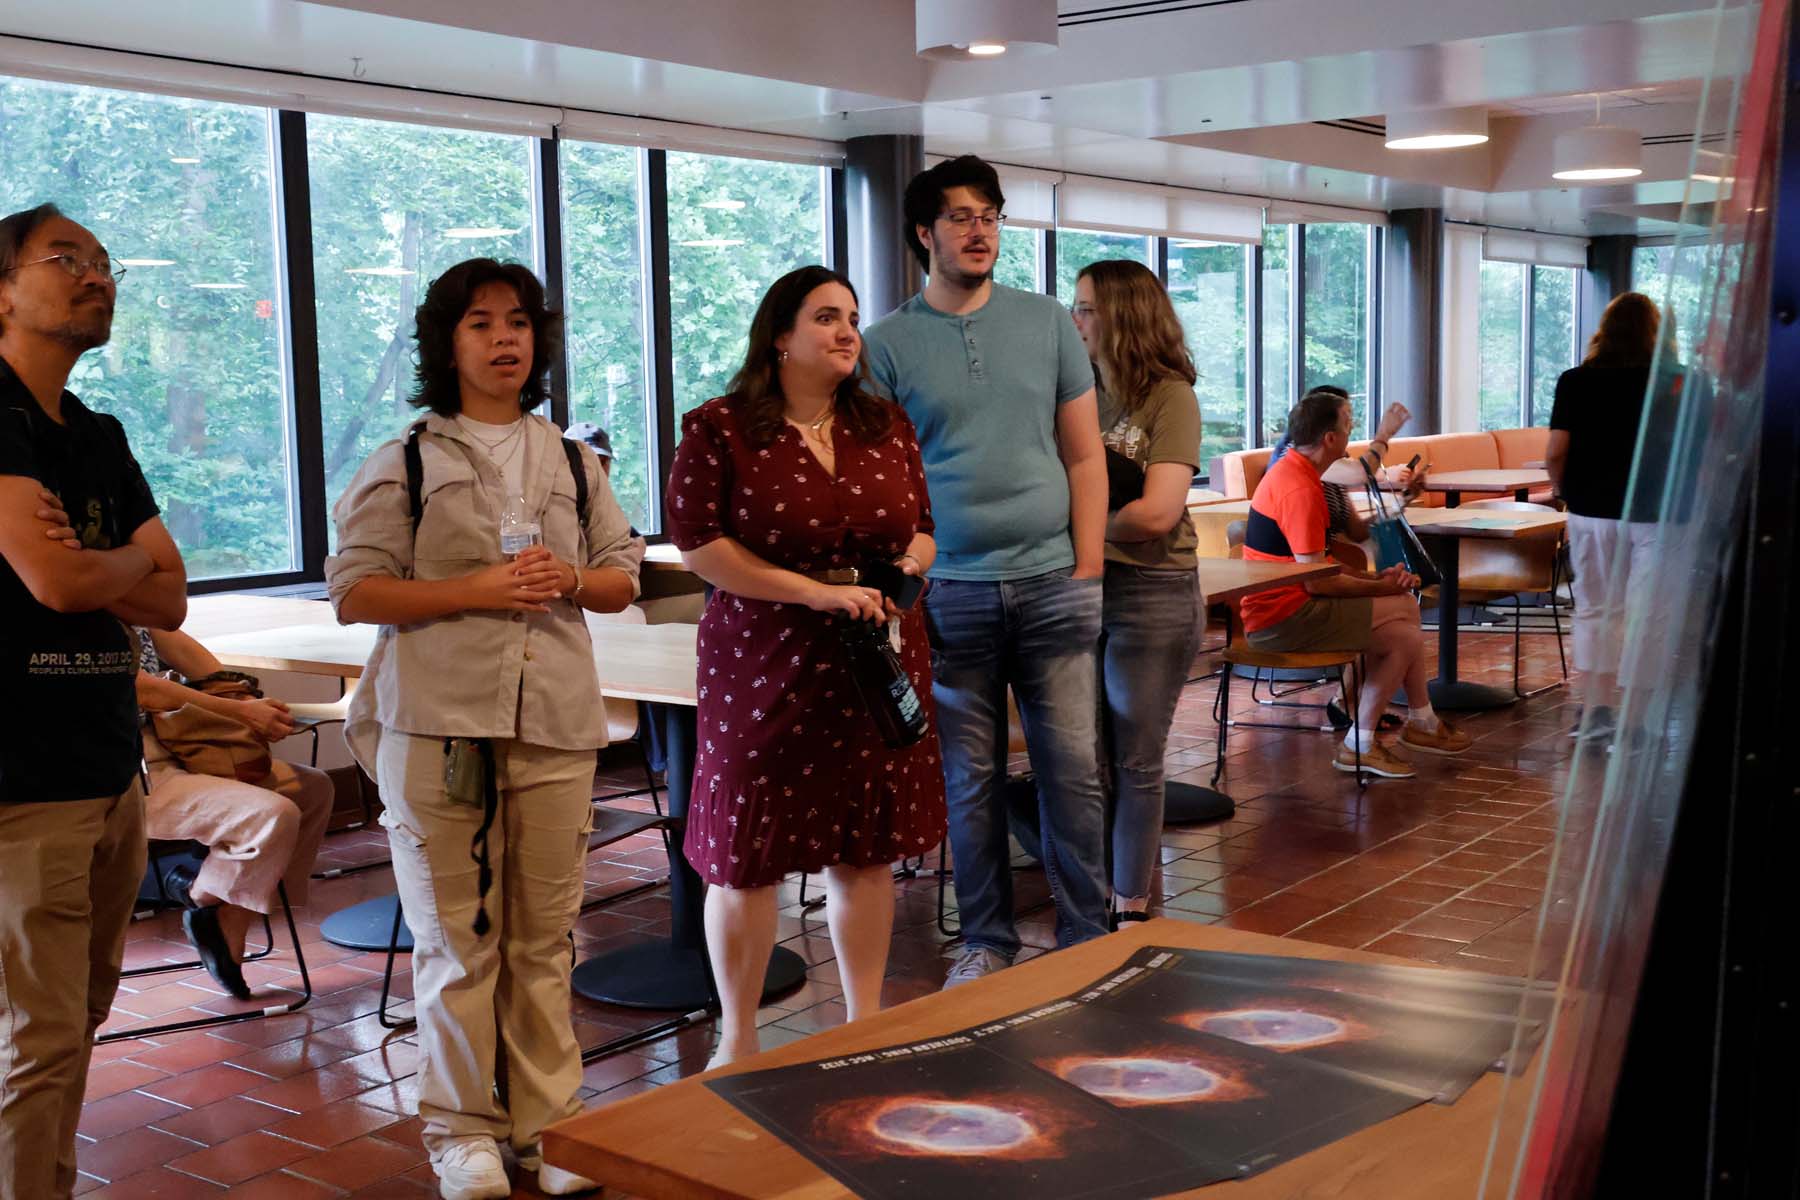 Photograph of several people reading the description of an art piece. Behind them is a row of tables and wall of windows on a forest. In front of them, several posters of space imagery sit on a table.